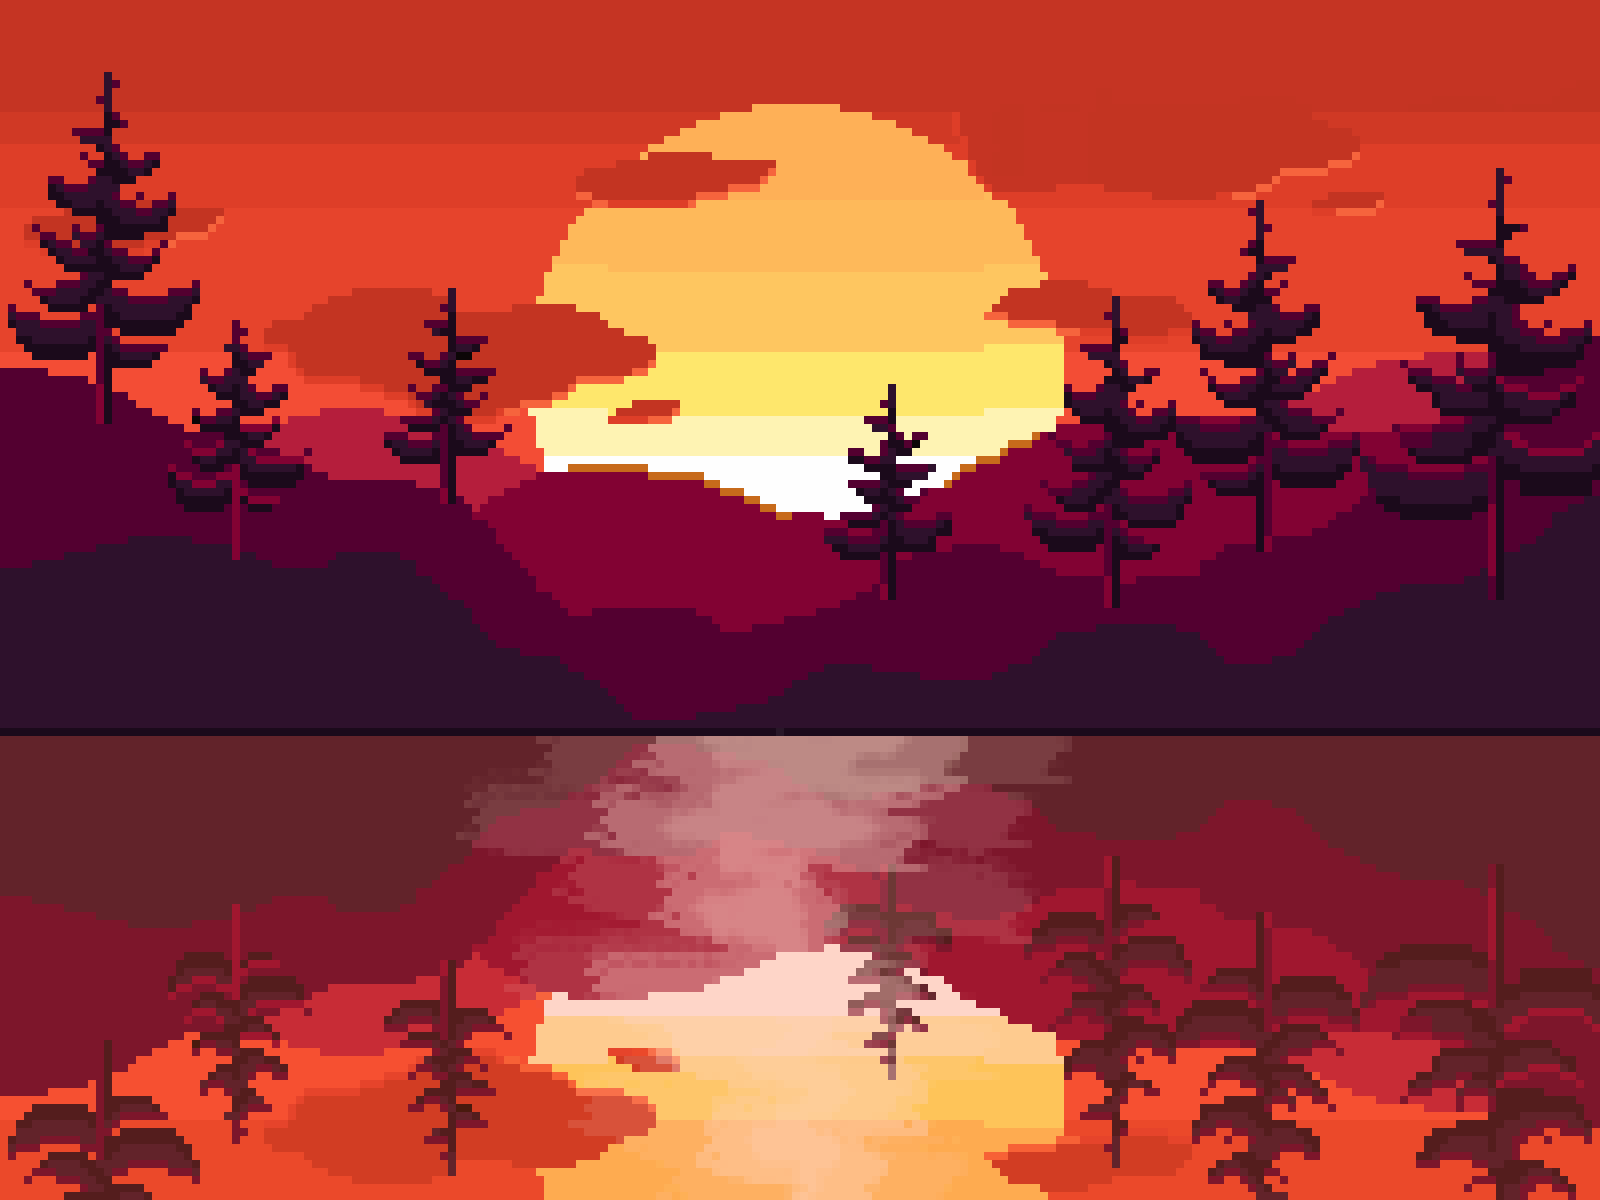 A pixelated sunset over a lake with trees - Pixel art